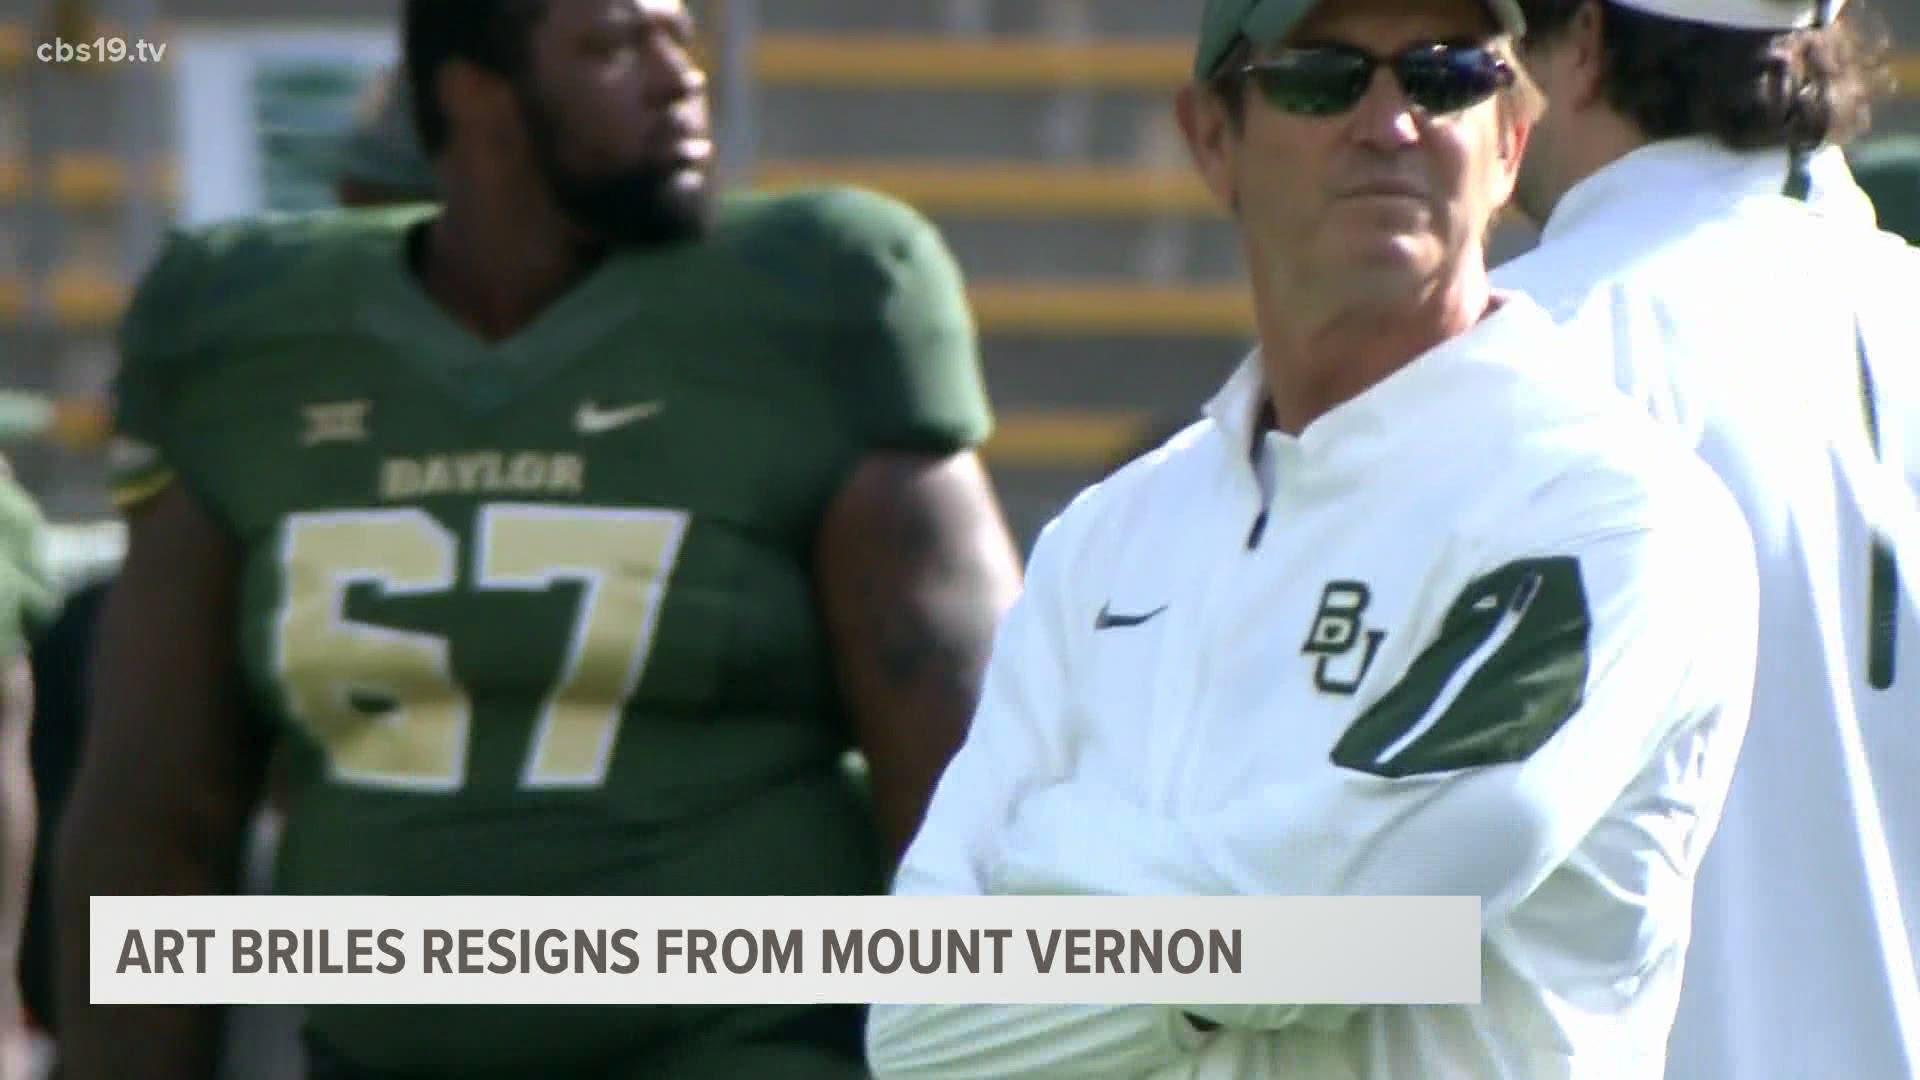 Art Briles has resigned as the head football coach at Mount Vernon High School following the team's 24-17 loss to Jim Ned in the UIL 3A Division I state semifinals.